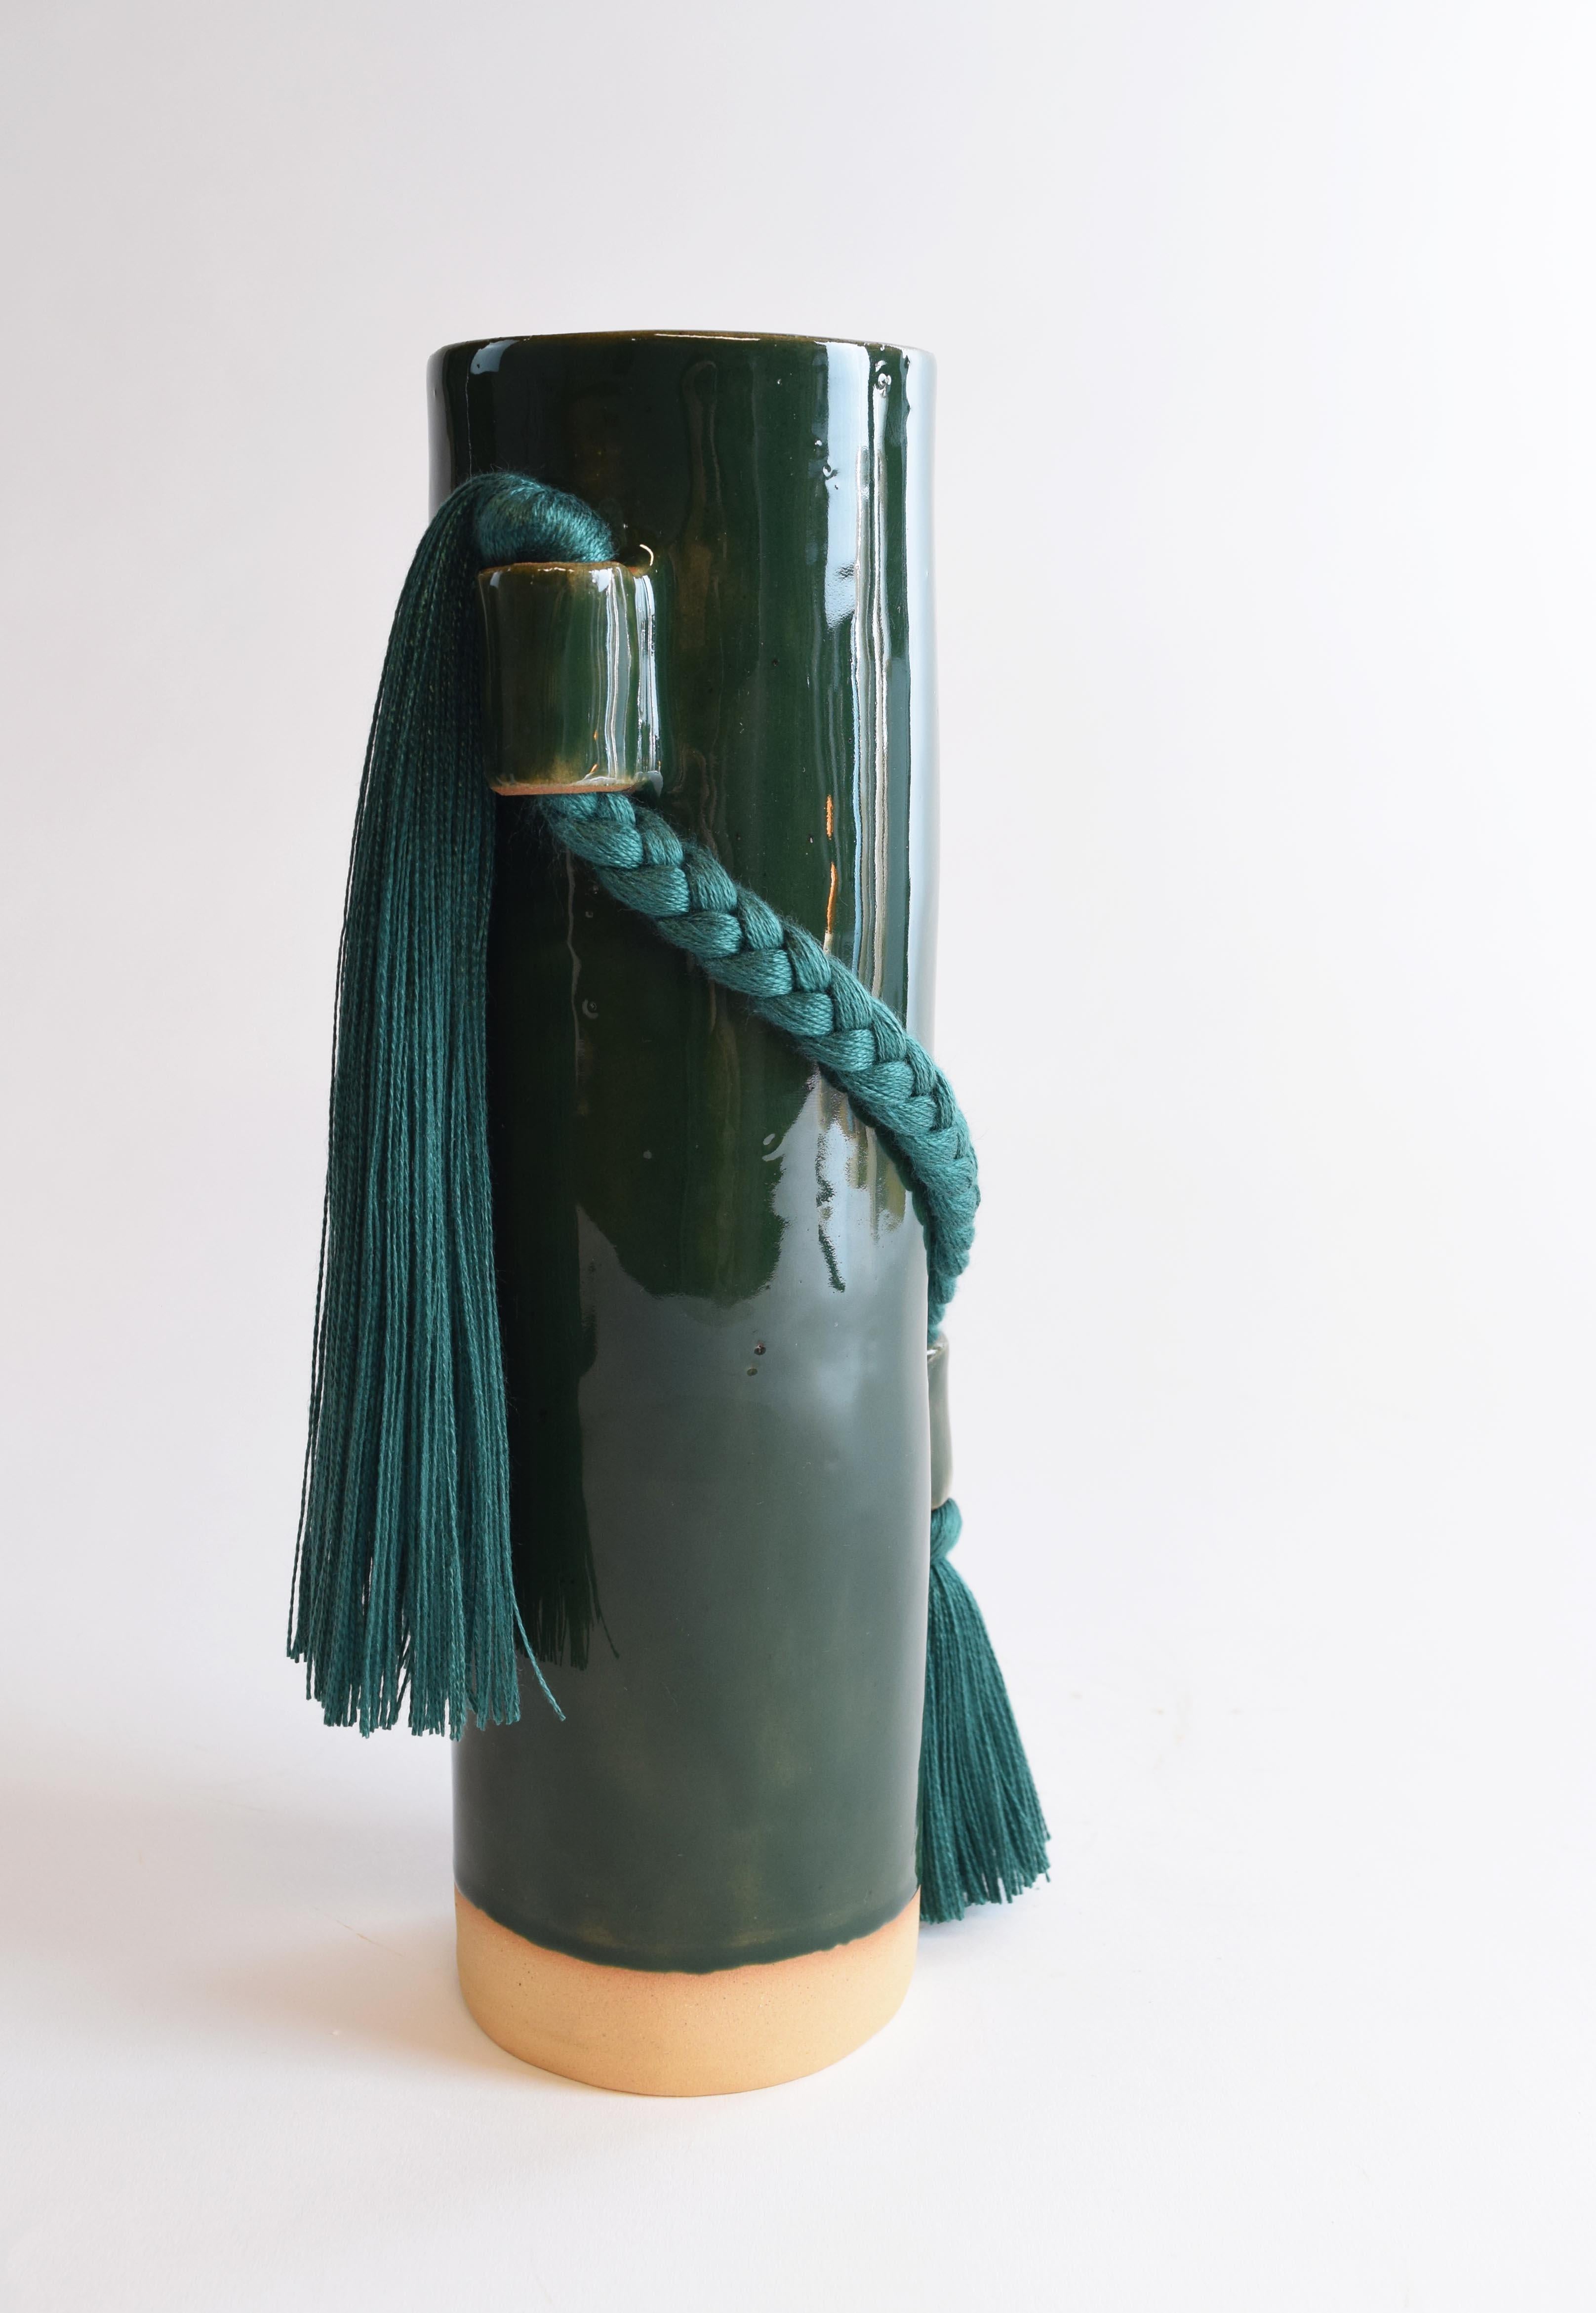 Vase #695 by Karen Gayle Tinney

Equal parts functional and sculptural, this vase is the perfect size for a small bouquet but packs enough detail for it to stand alone as a decorative object on a shelf or table.

Hand formed stoneware with dark